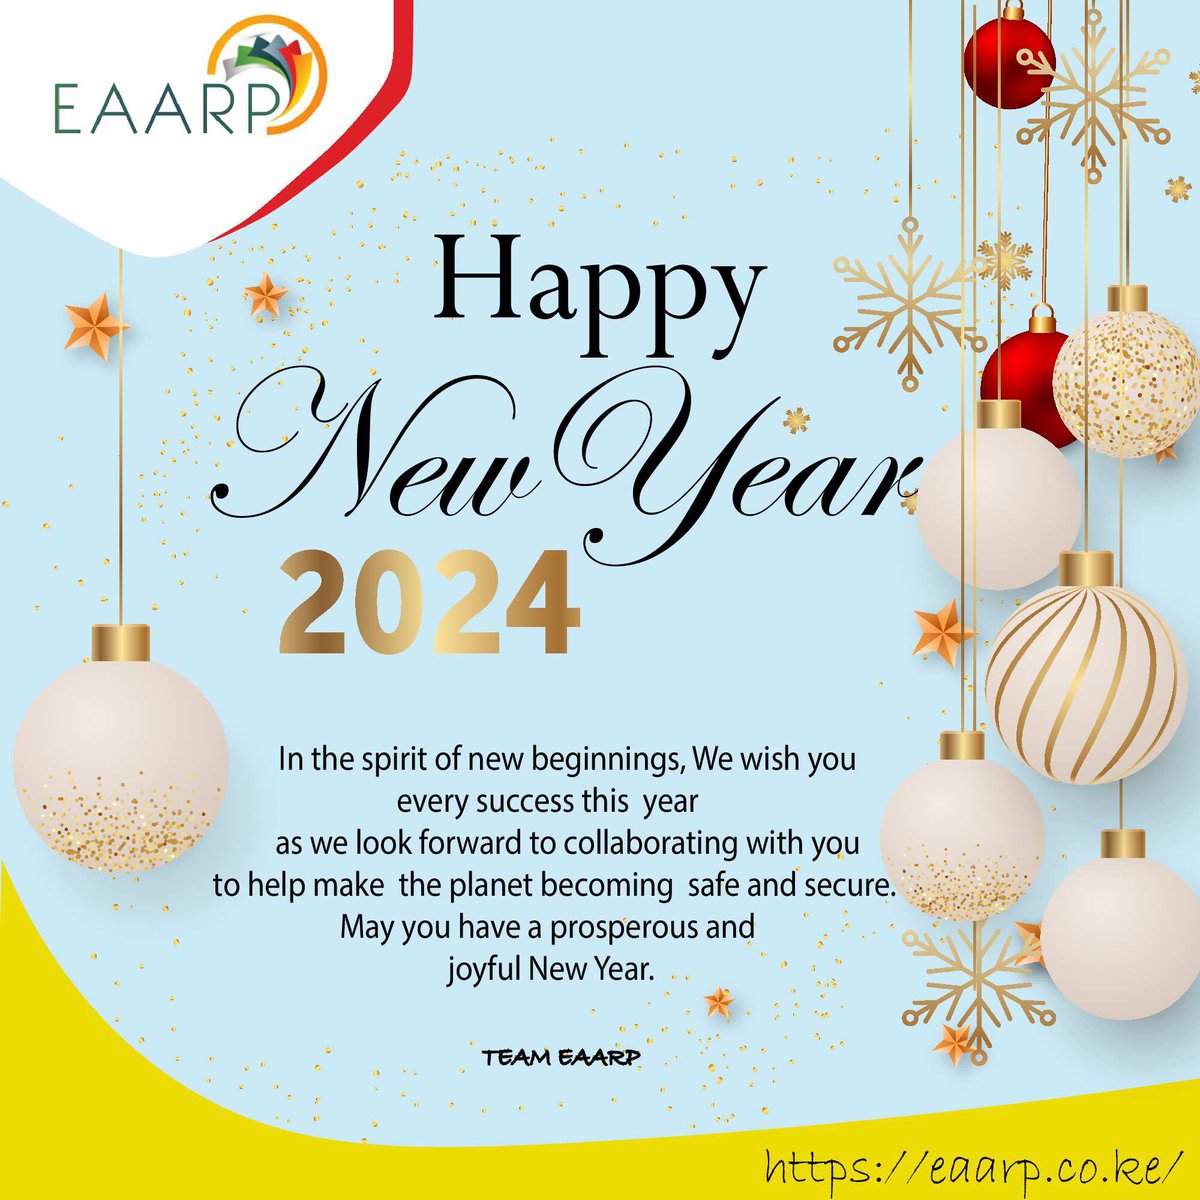 Cheers to a new year! As we welcome 2023, the Eastern Africa Association for Radiation Protection extends heartfelt wishes to all our members. Your commitment to excellence lights up our journey. Here's to another year of impactful collaboration and advancement!  #HappyNewYear